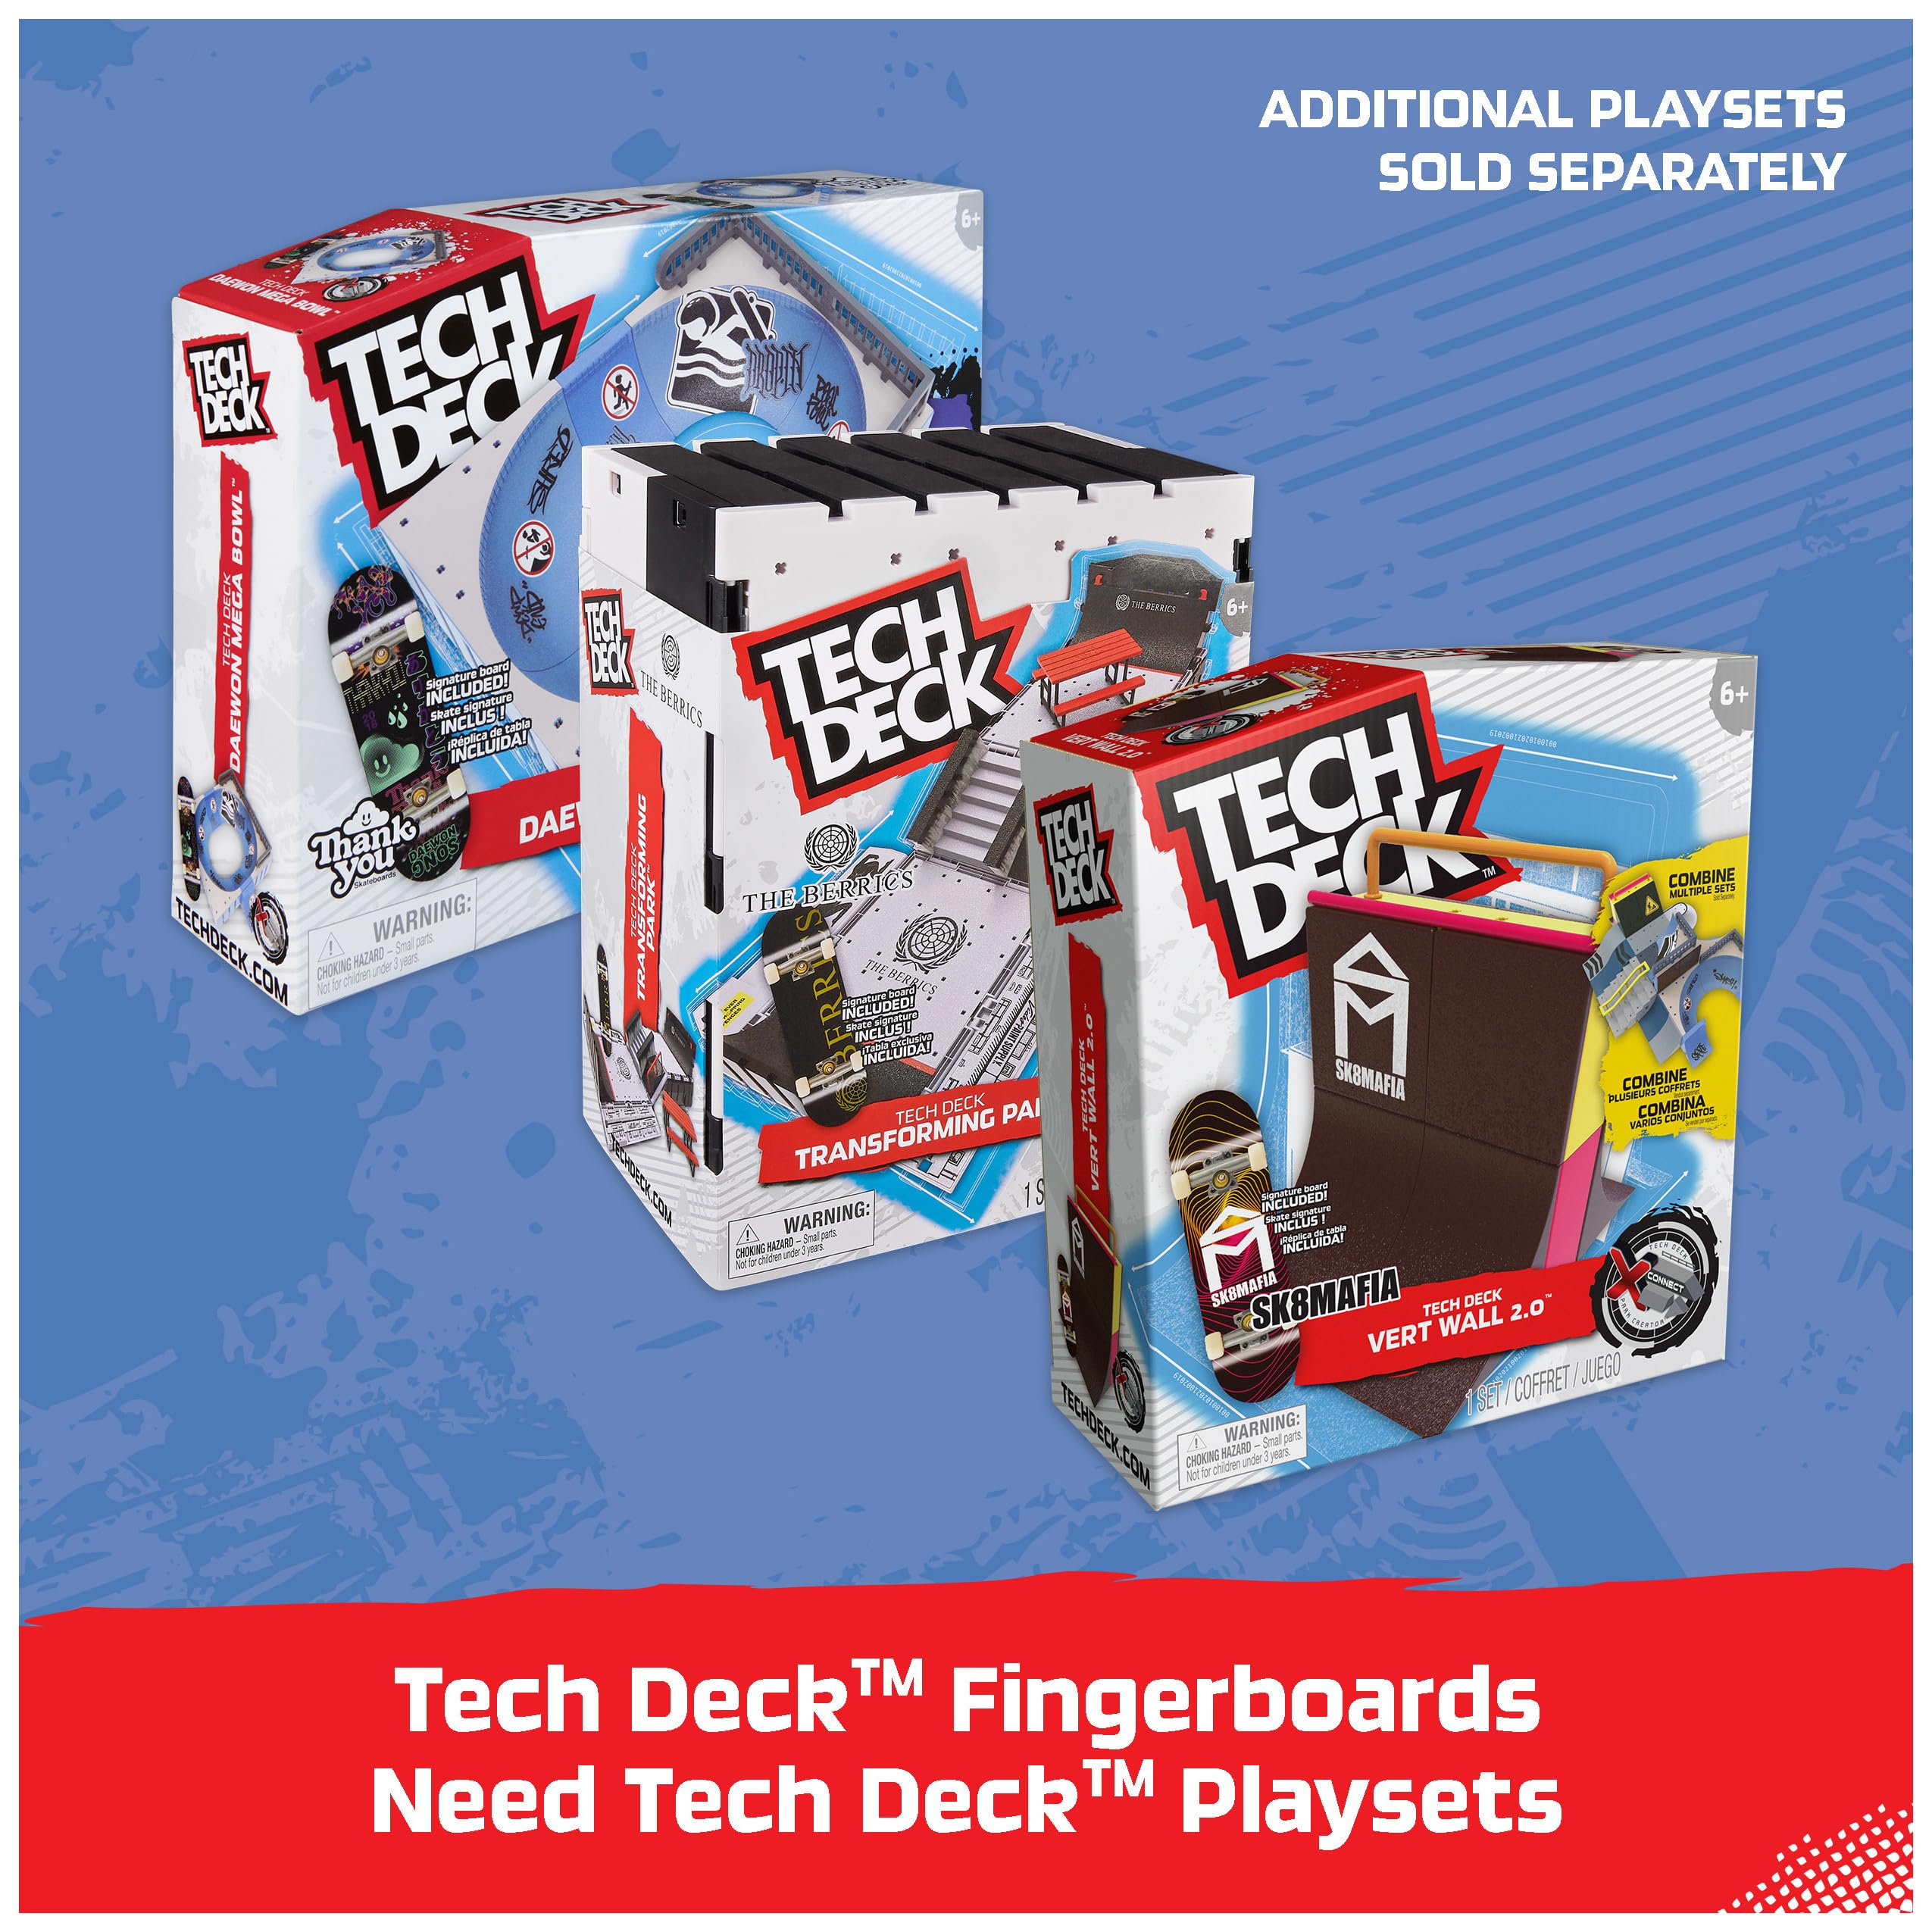 TECH DECK, 25th Anniversary 8-Pack Fingerboards with Exclusive Figure, Collectible and Customizable Mini Skateboards, Kids Toys for Ages 6 and up